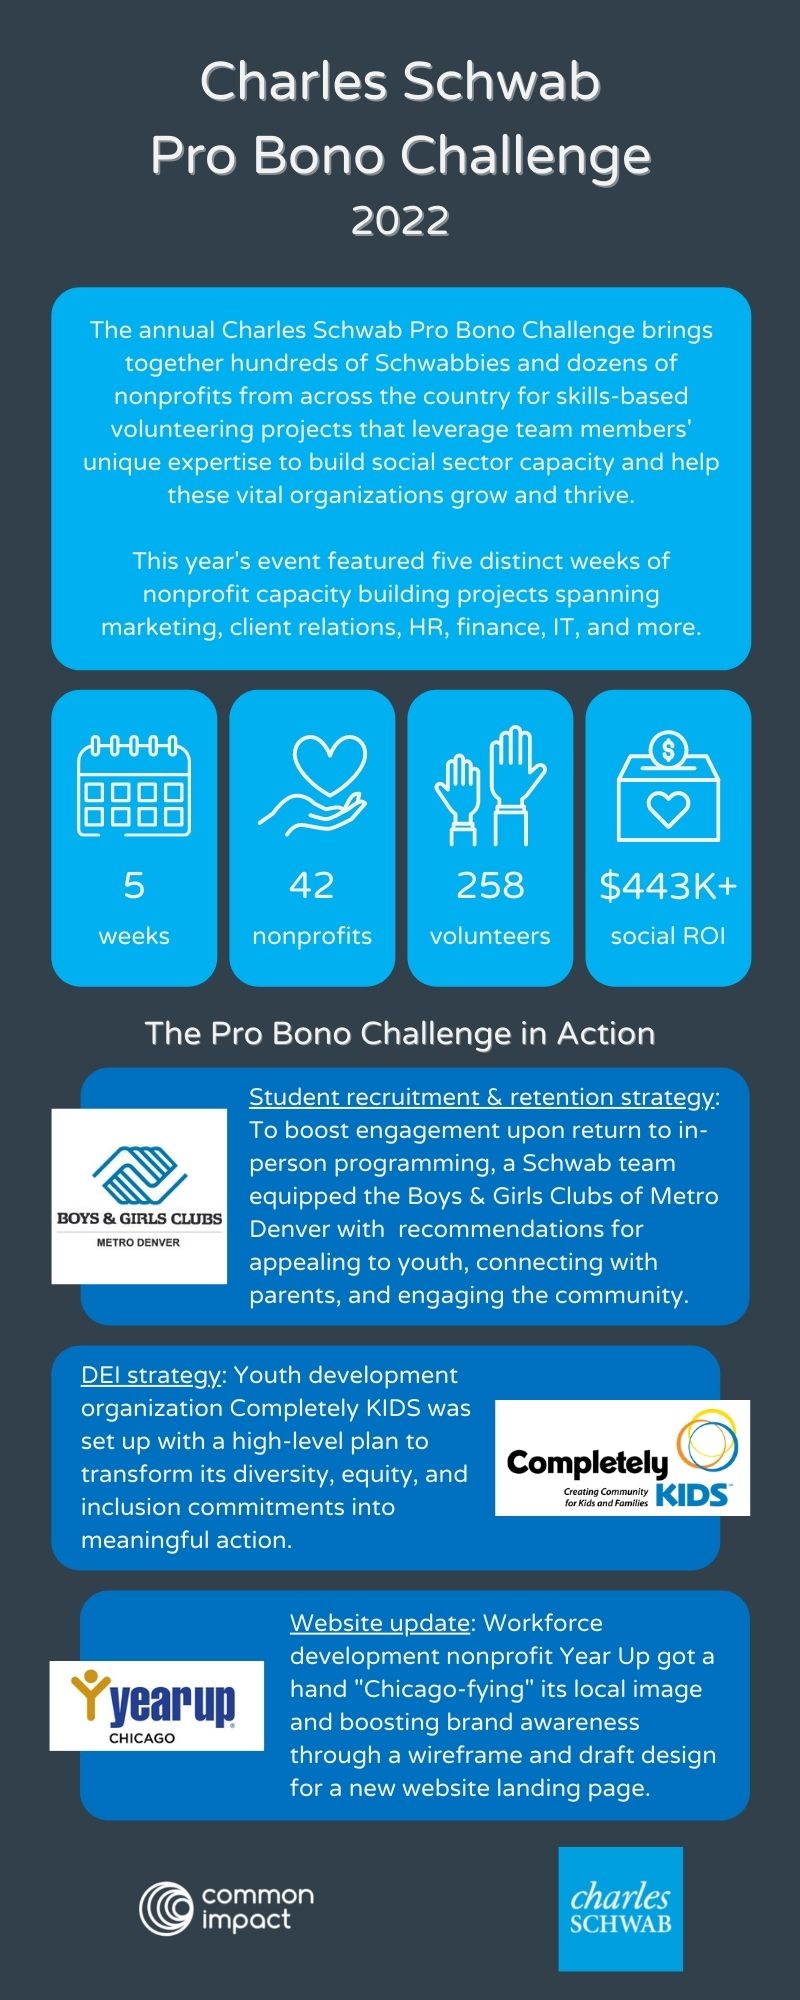 Charles Schwab Pro Bono Challenge 2022 infographic: summary, impact highlights, and signature projects